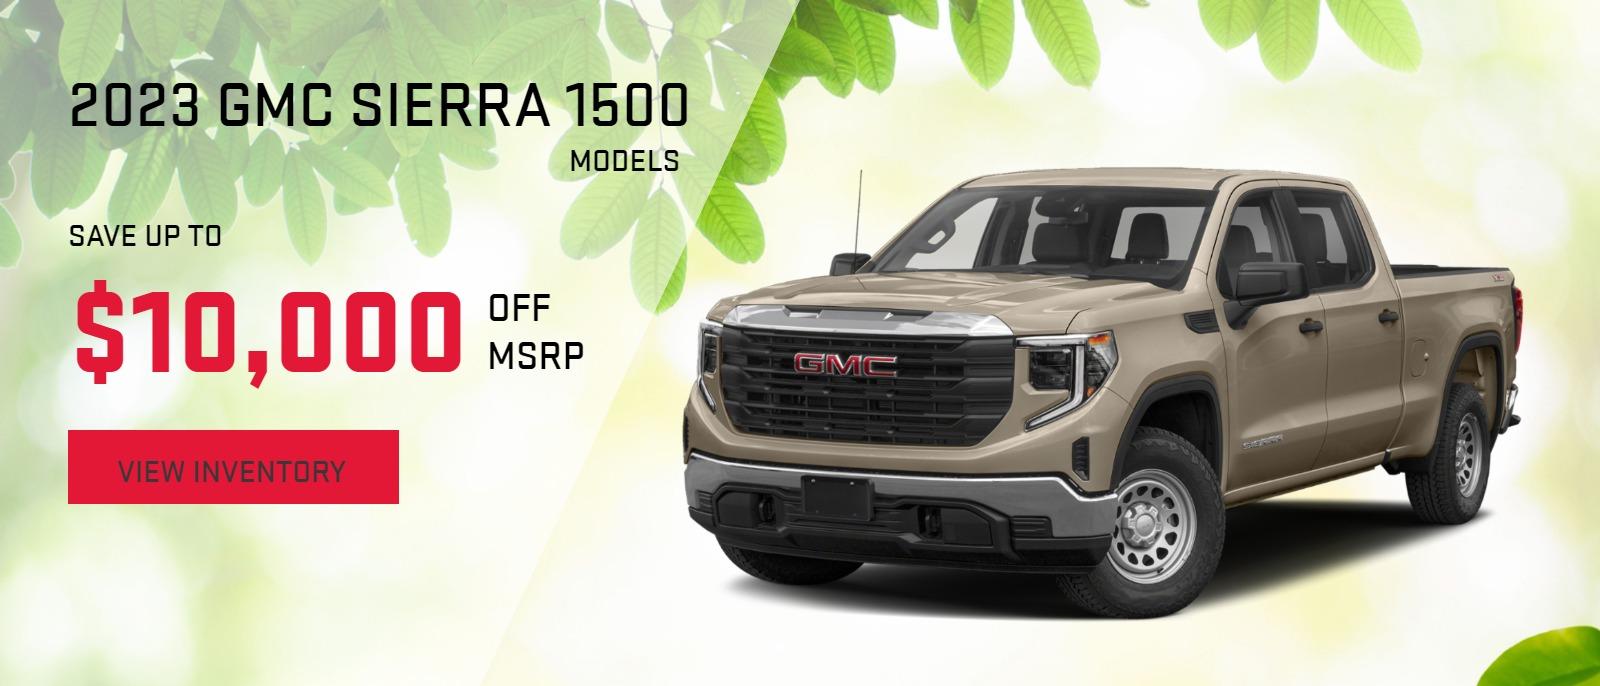 2023 GMC SIERRA 1500
UP TO $10,000 OFF MSRP